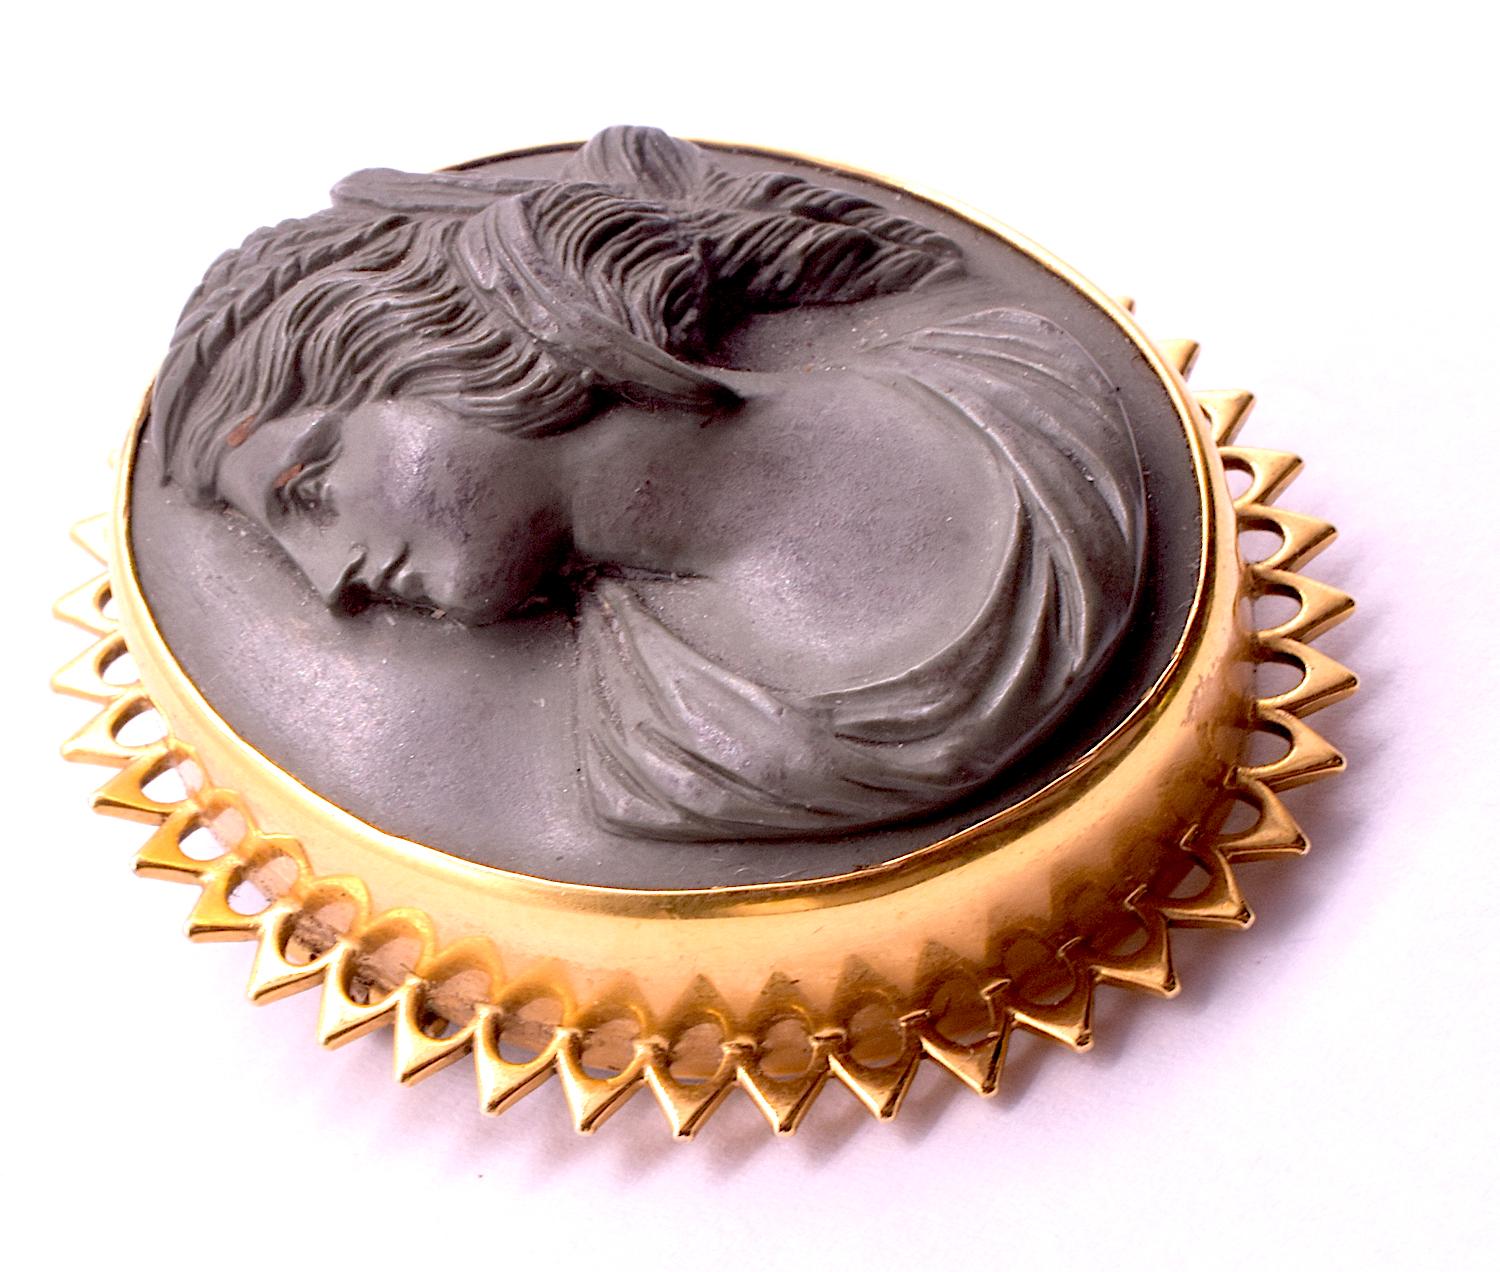 Lava cameo brooch of Demeter, or Ceres in Latin (as she was known to the Romans) with a crown of wheat sheaves in her hair. The gold openwork bezel is of 12K and is an unusual pointed shape. The carving of the folds of her collar as well as the